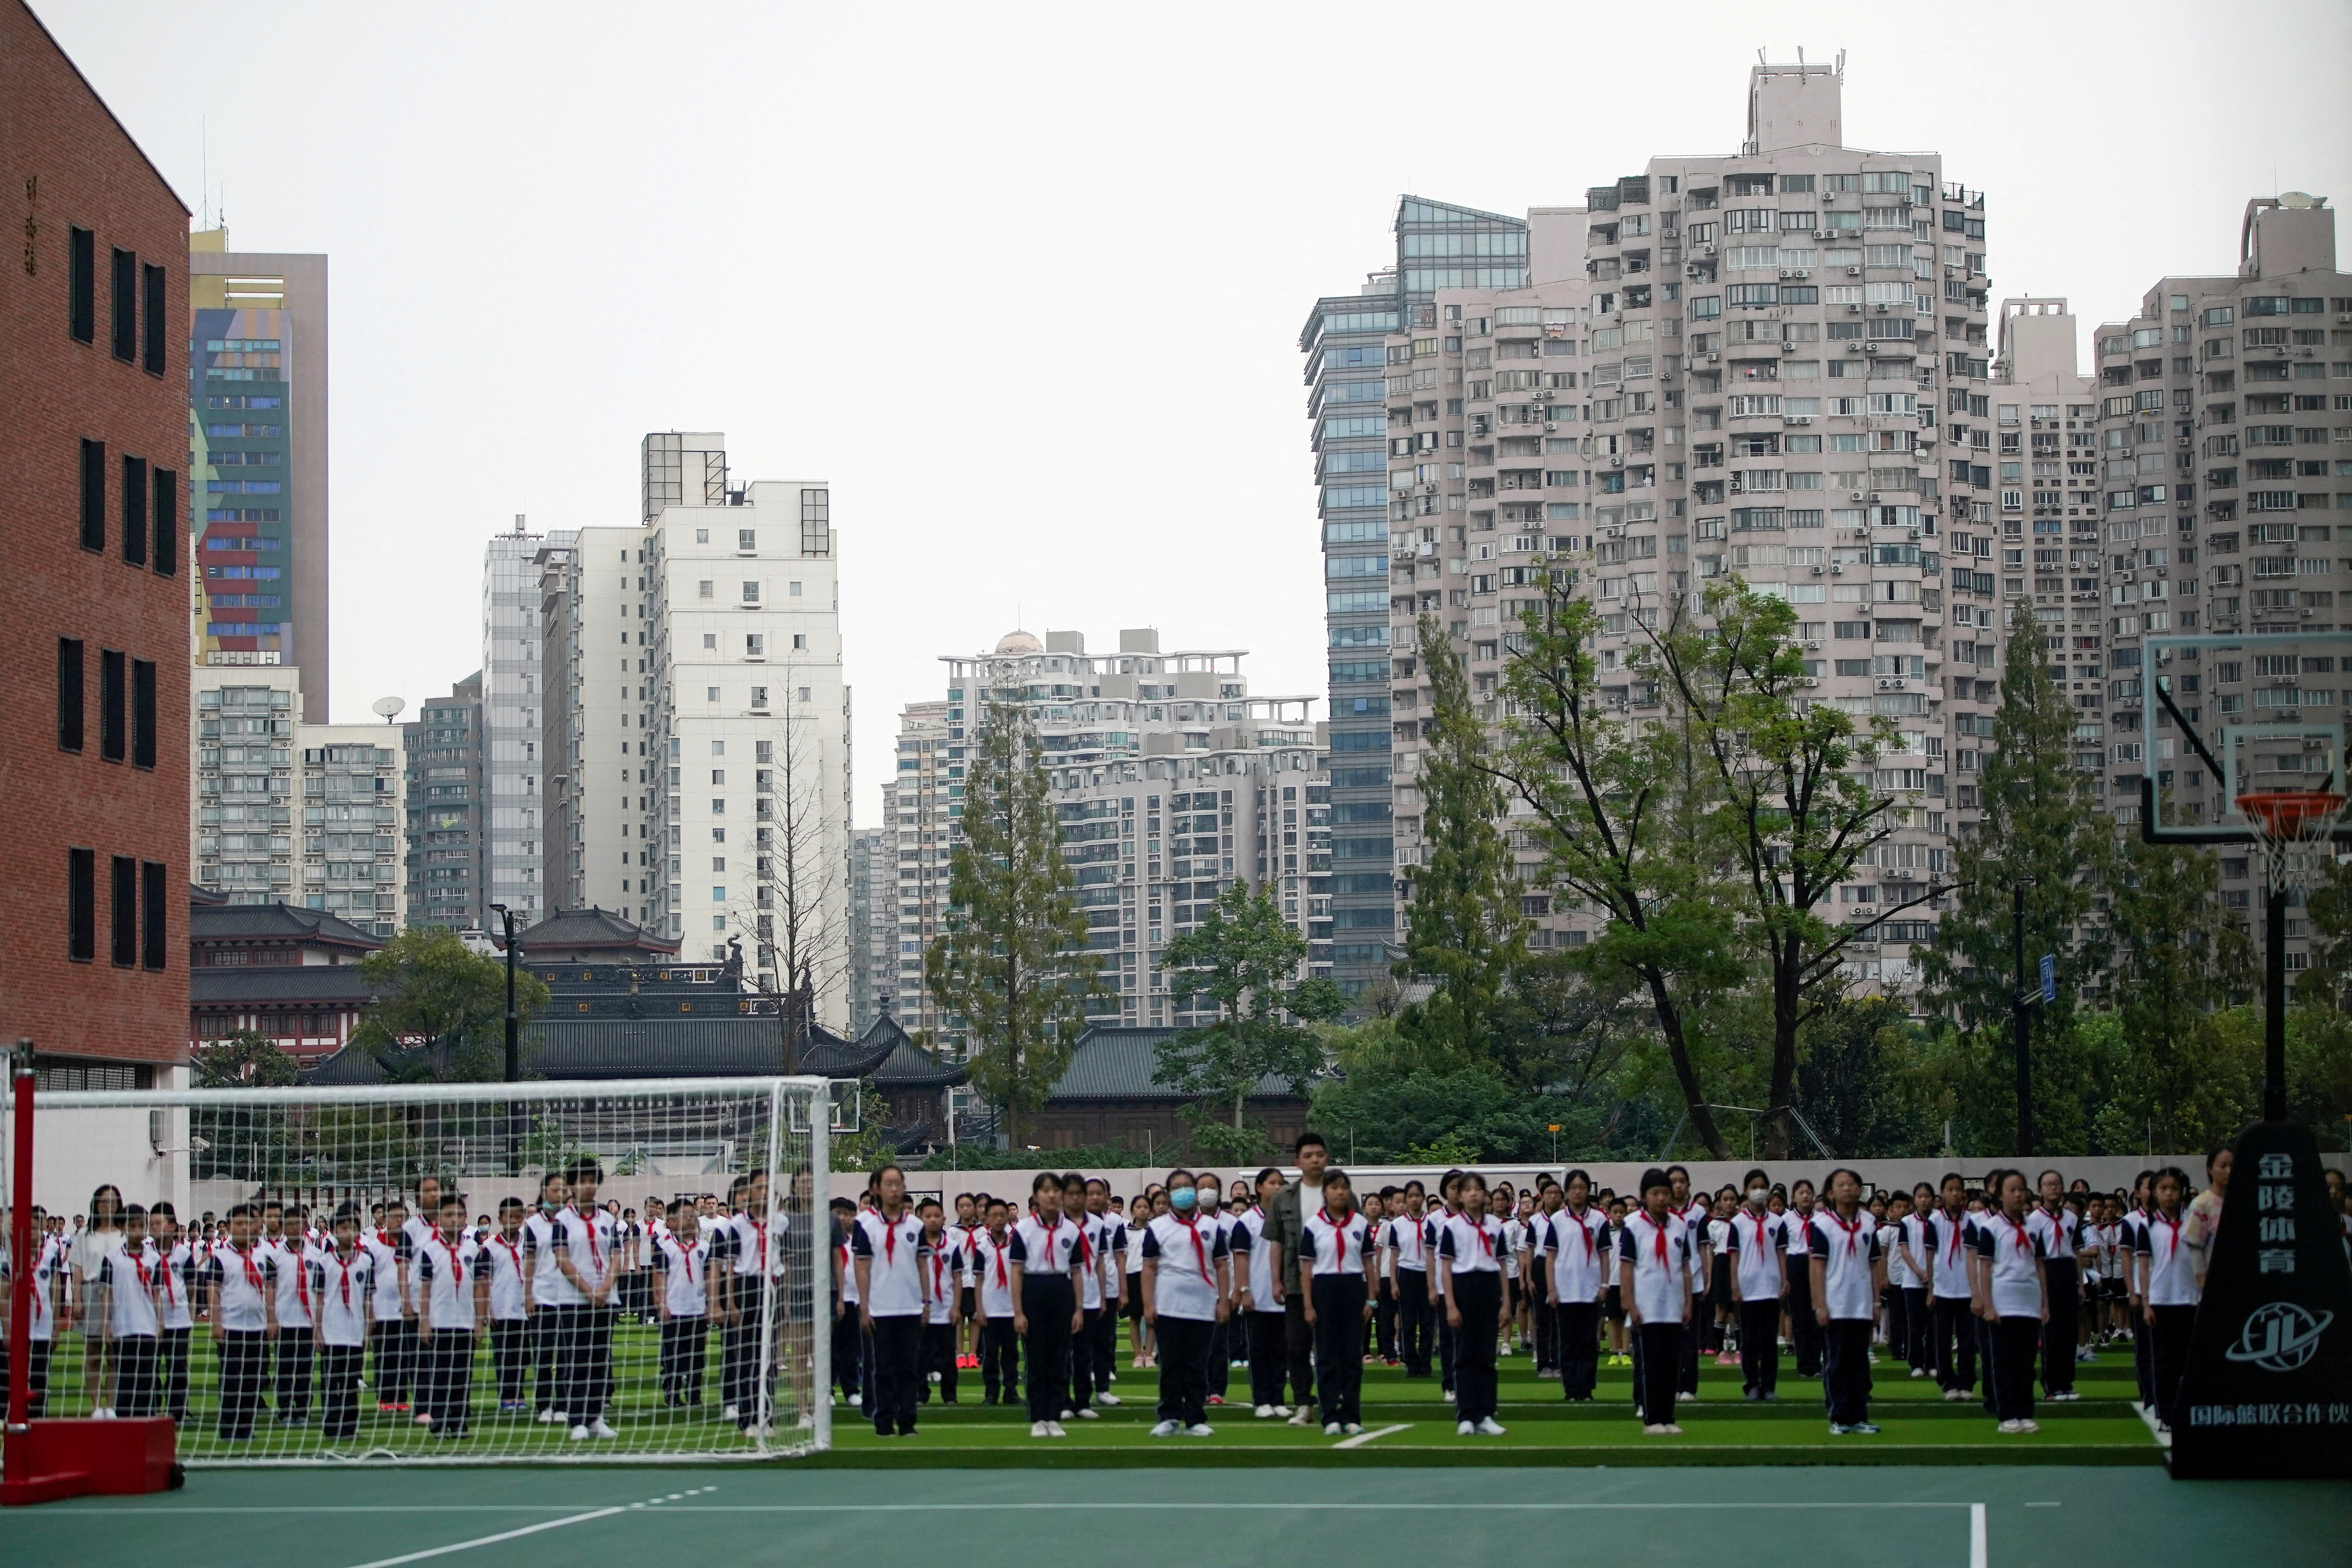 Students stand at a school on the first day of new academic year in Shanghai